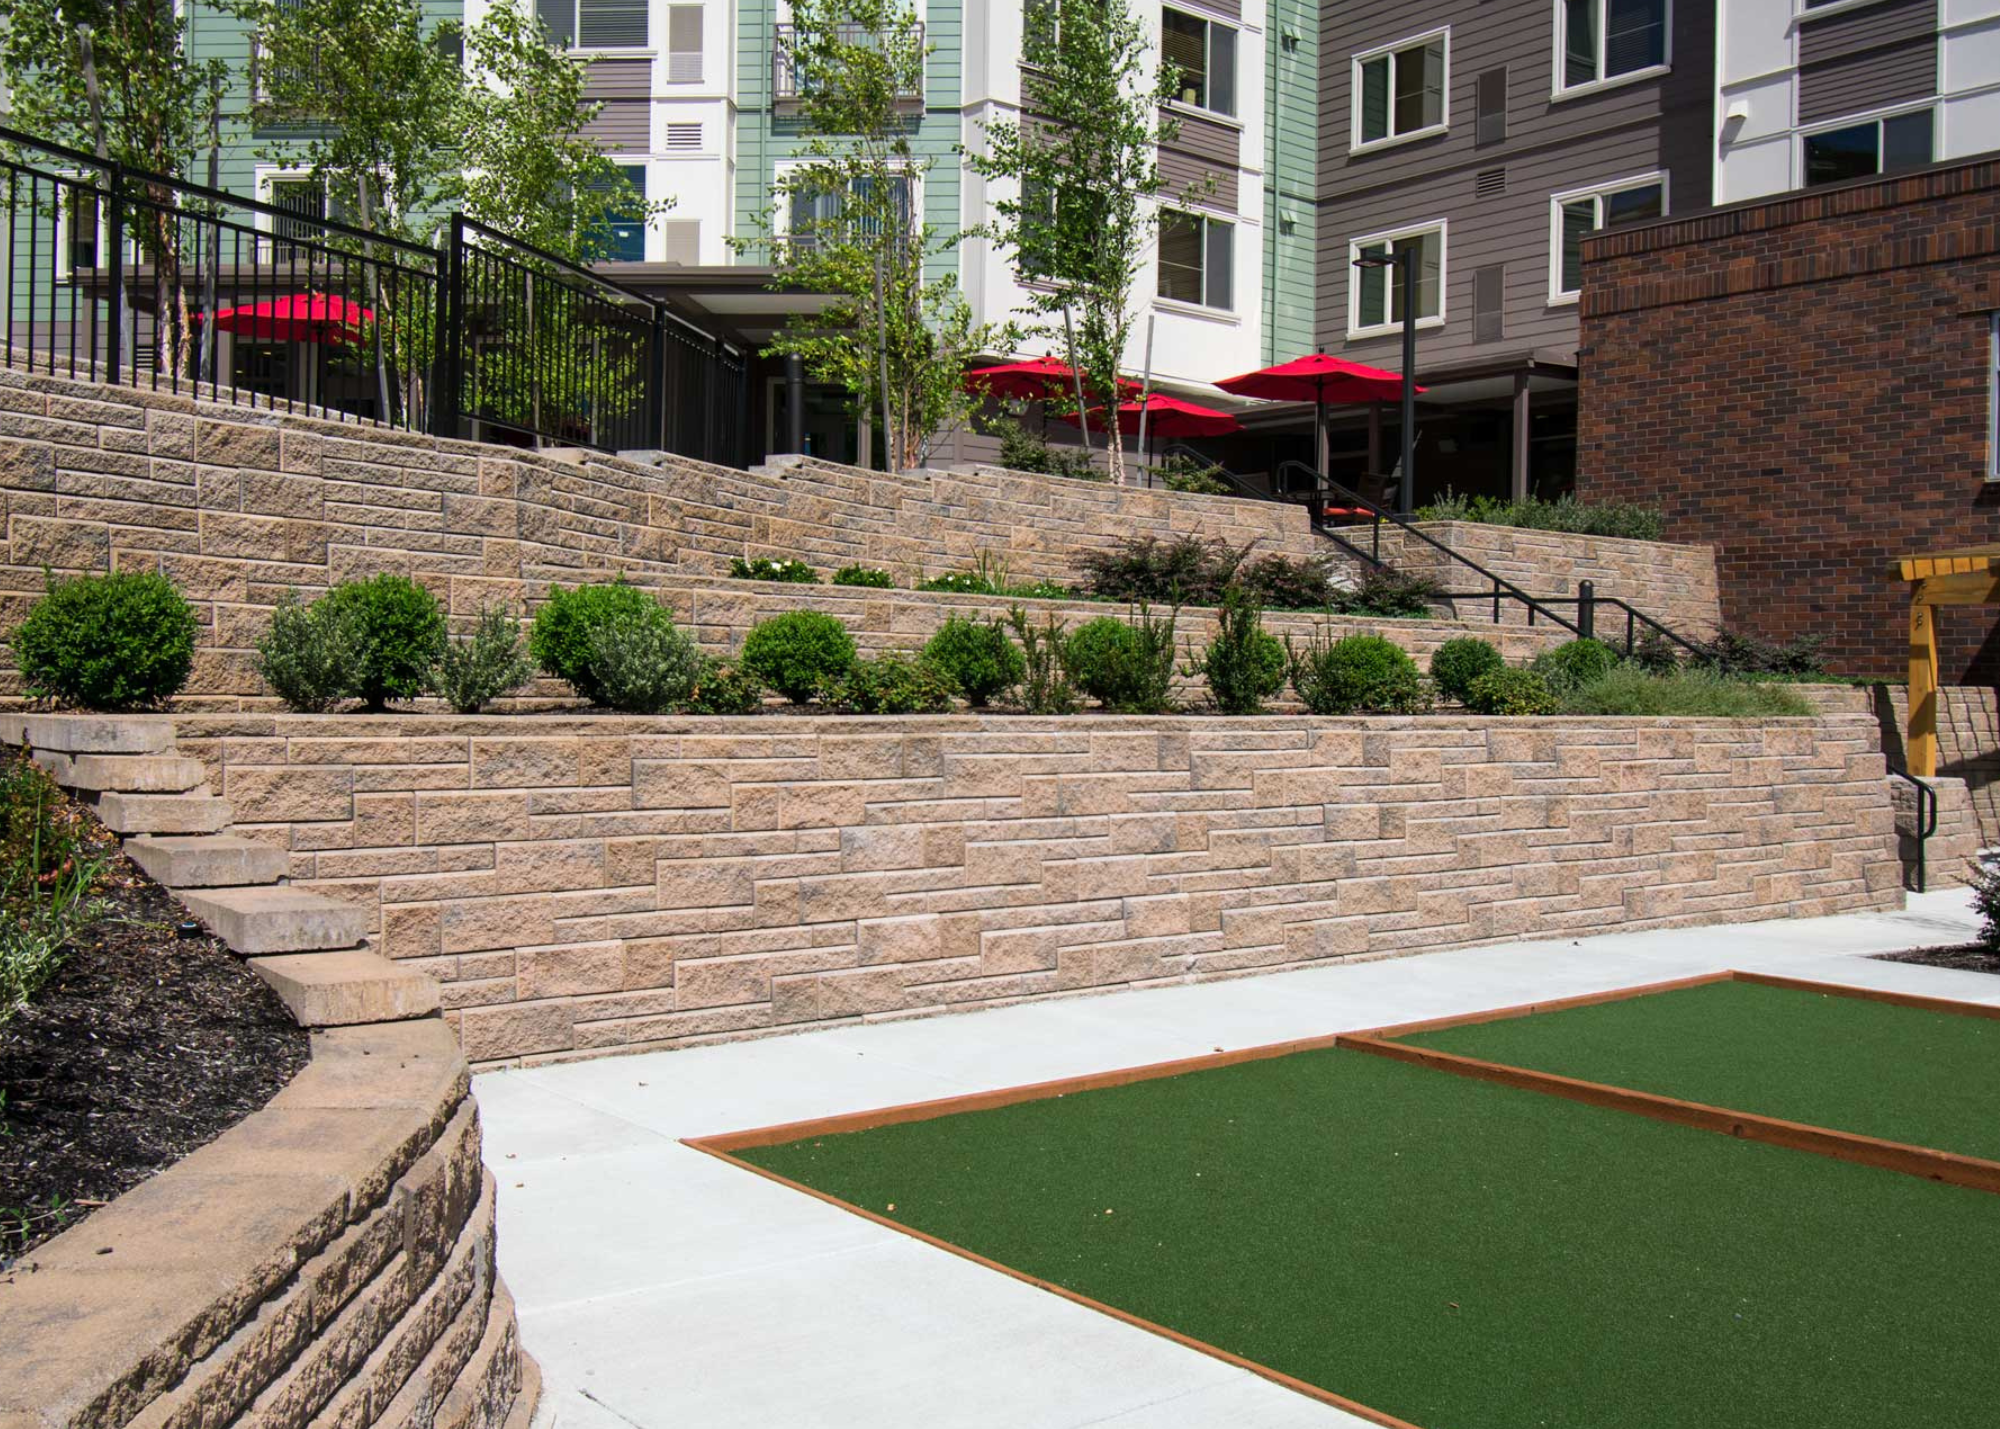 Retaining wall made from Oregon Block pavers